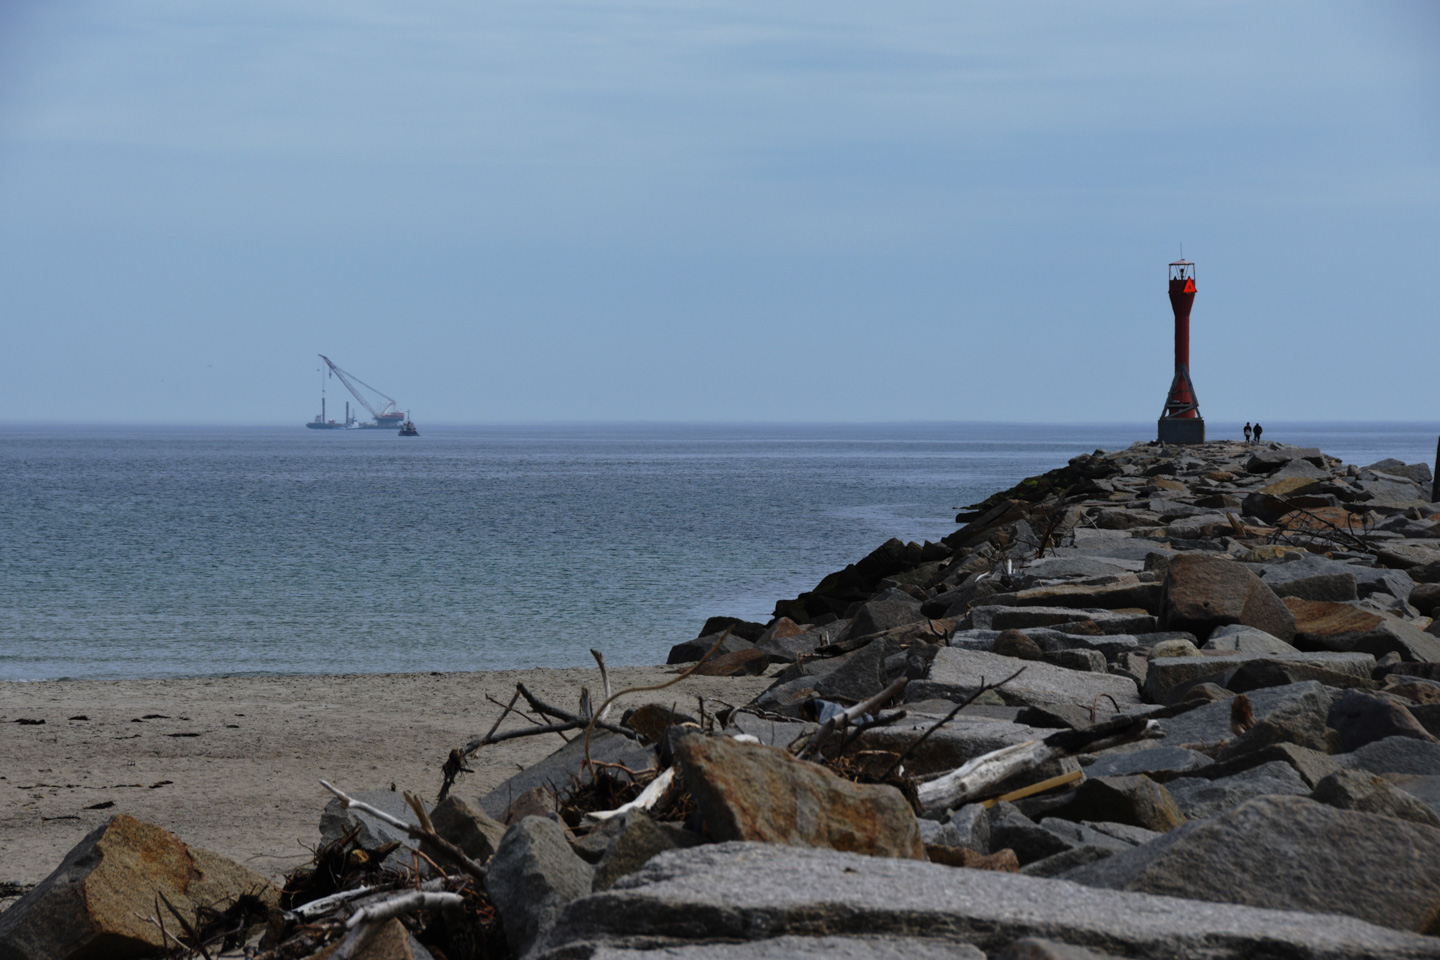 Cape Cod Canal breakwater and a barge with a large crane on it